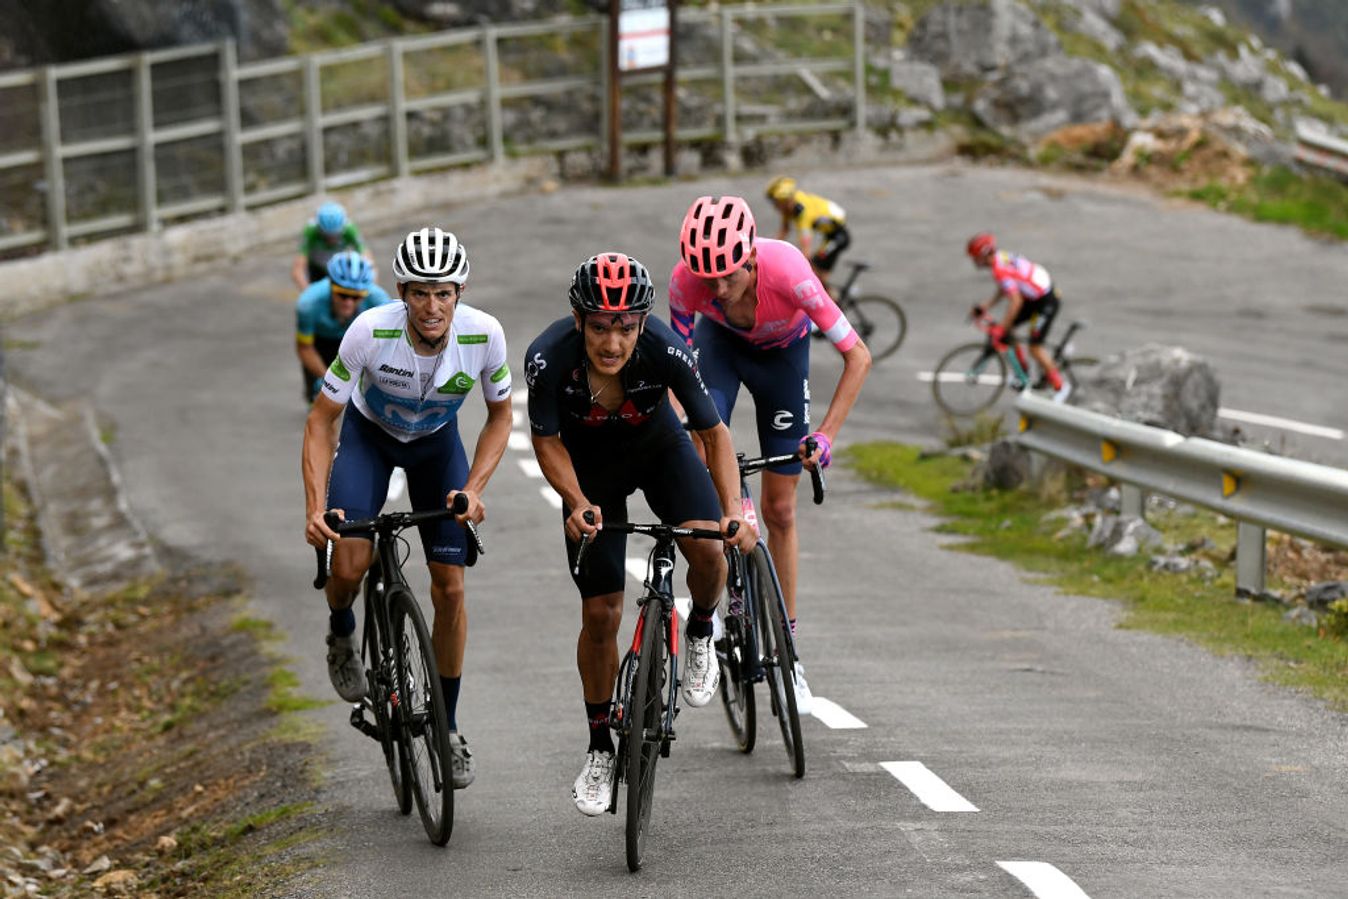 Roglic in red and in trouble at the back as his rivals attack, with Hugh Carthy (in pink) going on to win